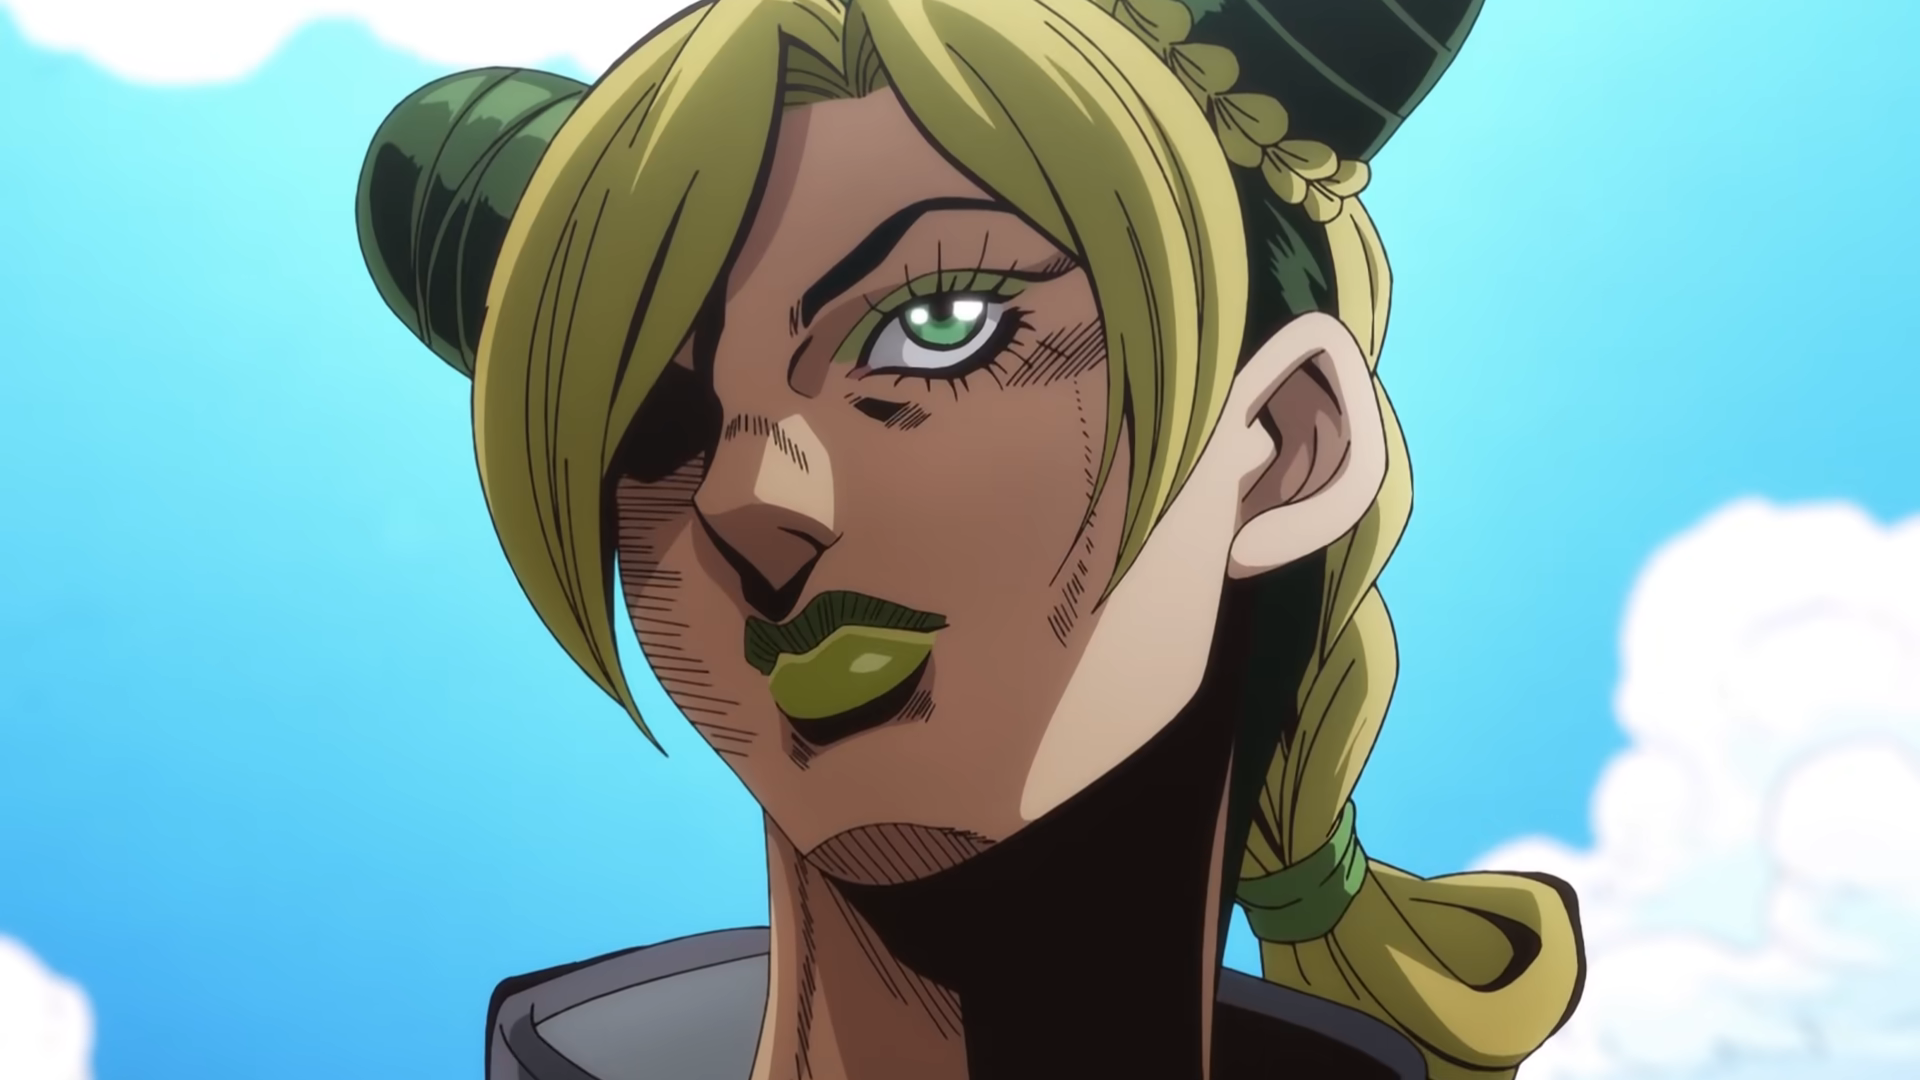 What is the ending song to the Stone Ocean anime and who performs it?